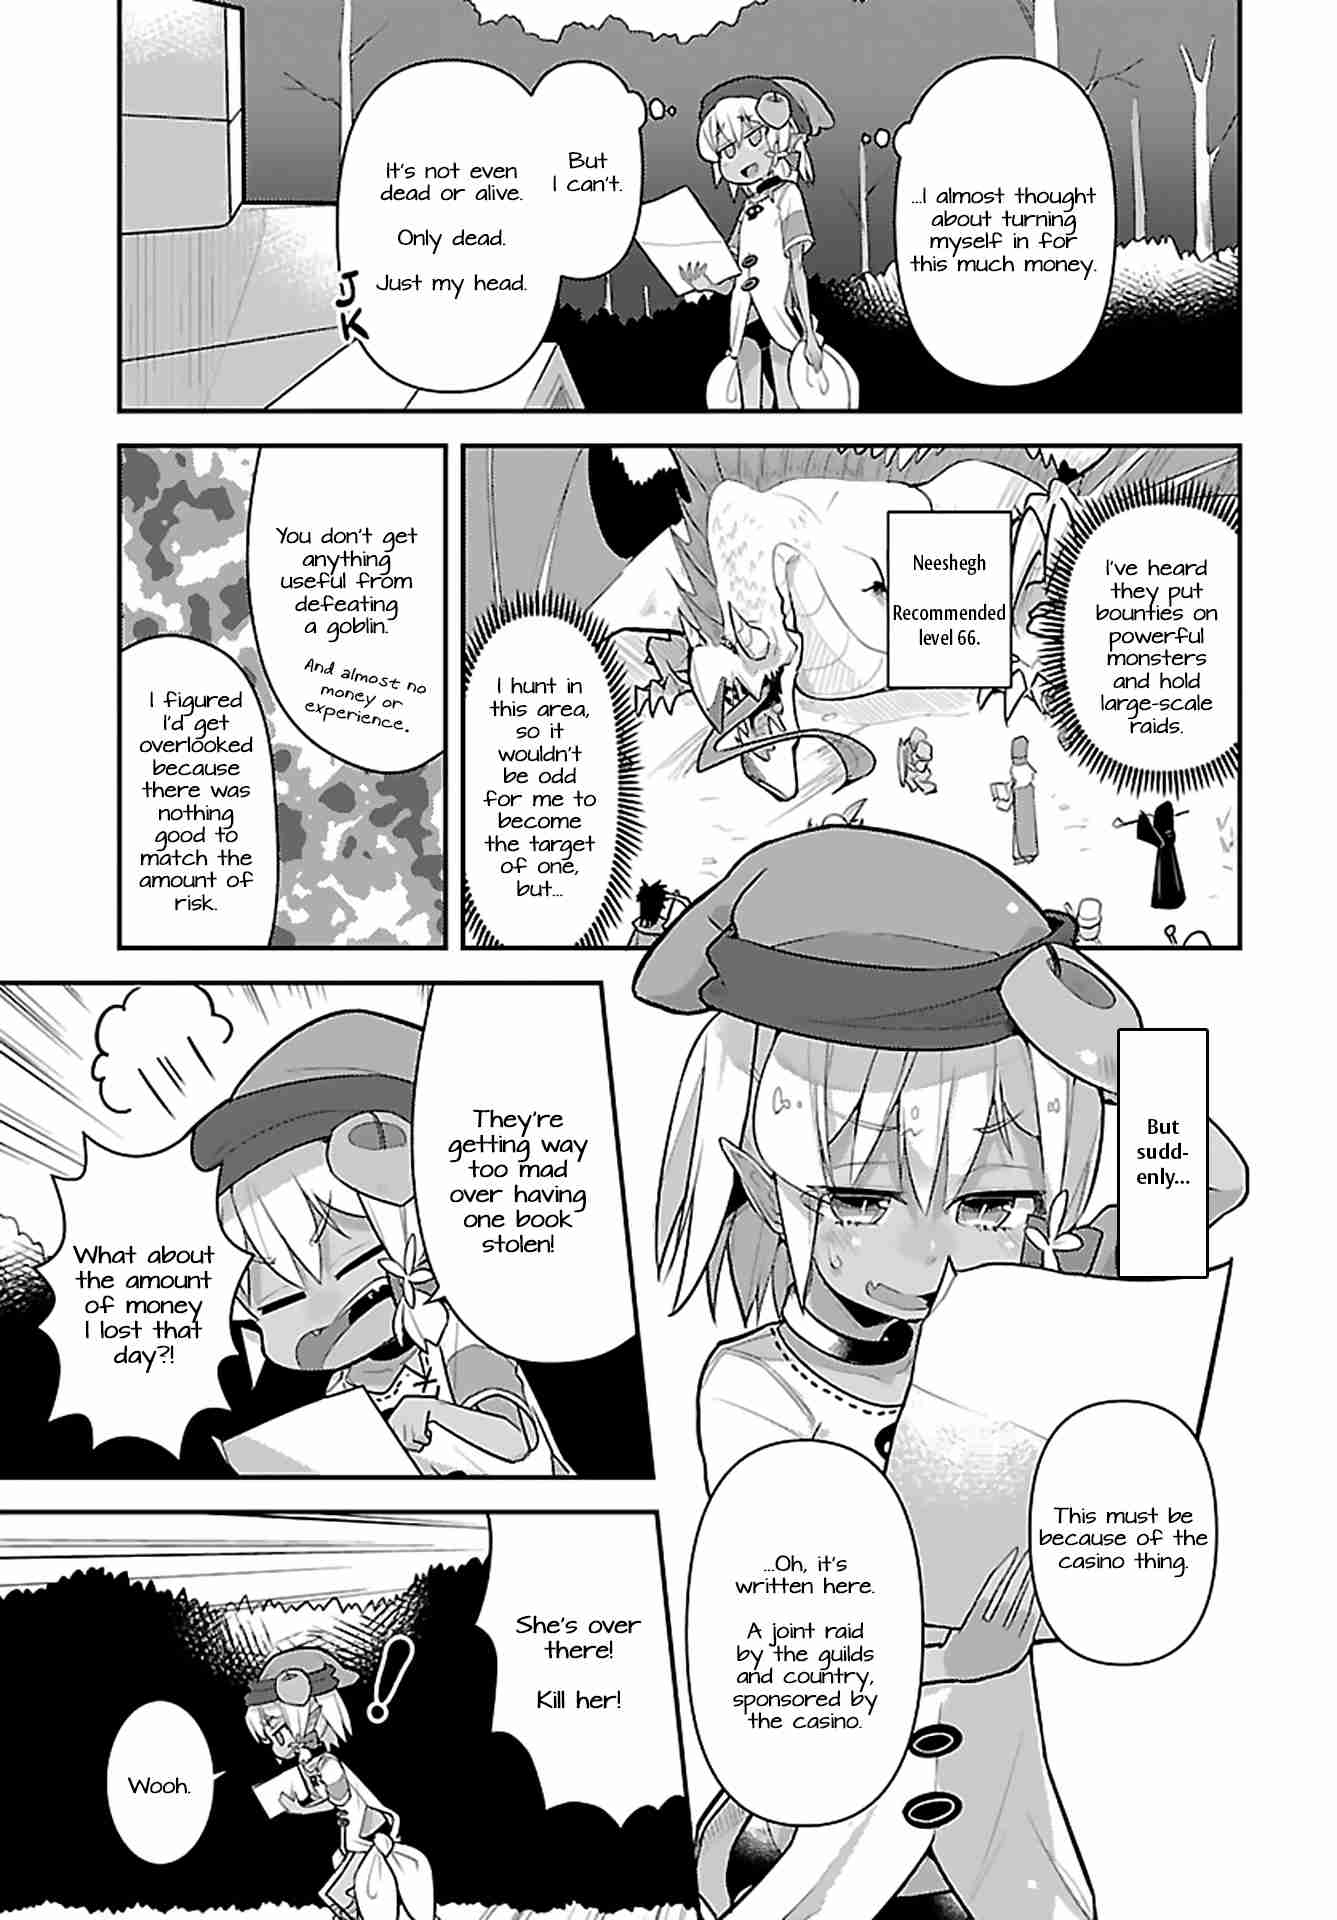 Goblin Is Very Strong Vol.2 Ch.10, Goblin Is Very Strong Vol.2 Ch.10 Page 3 - Nine Anime